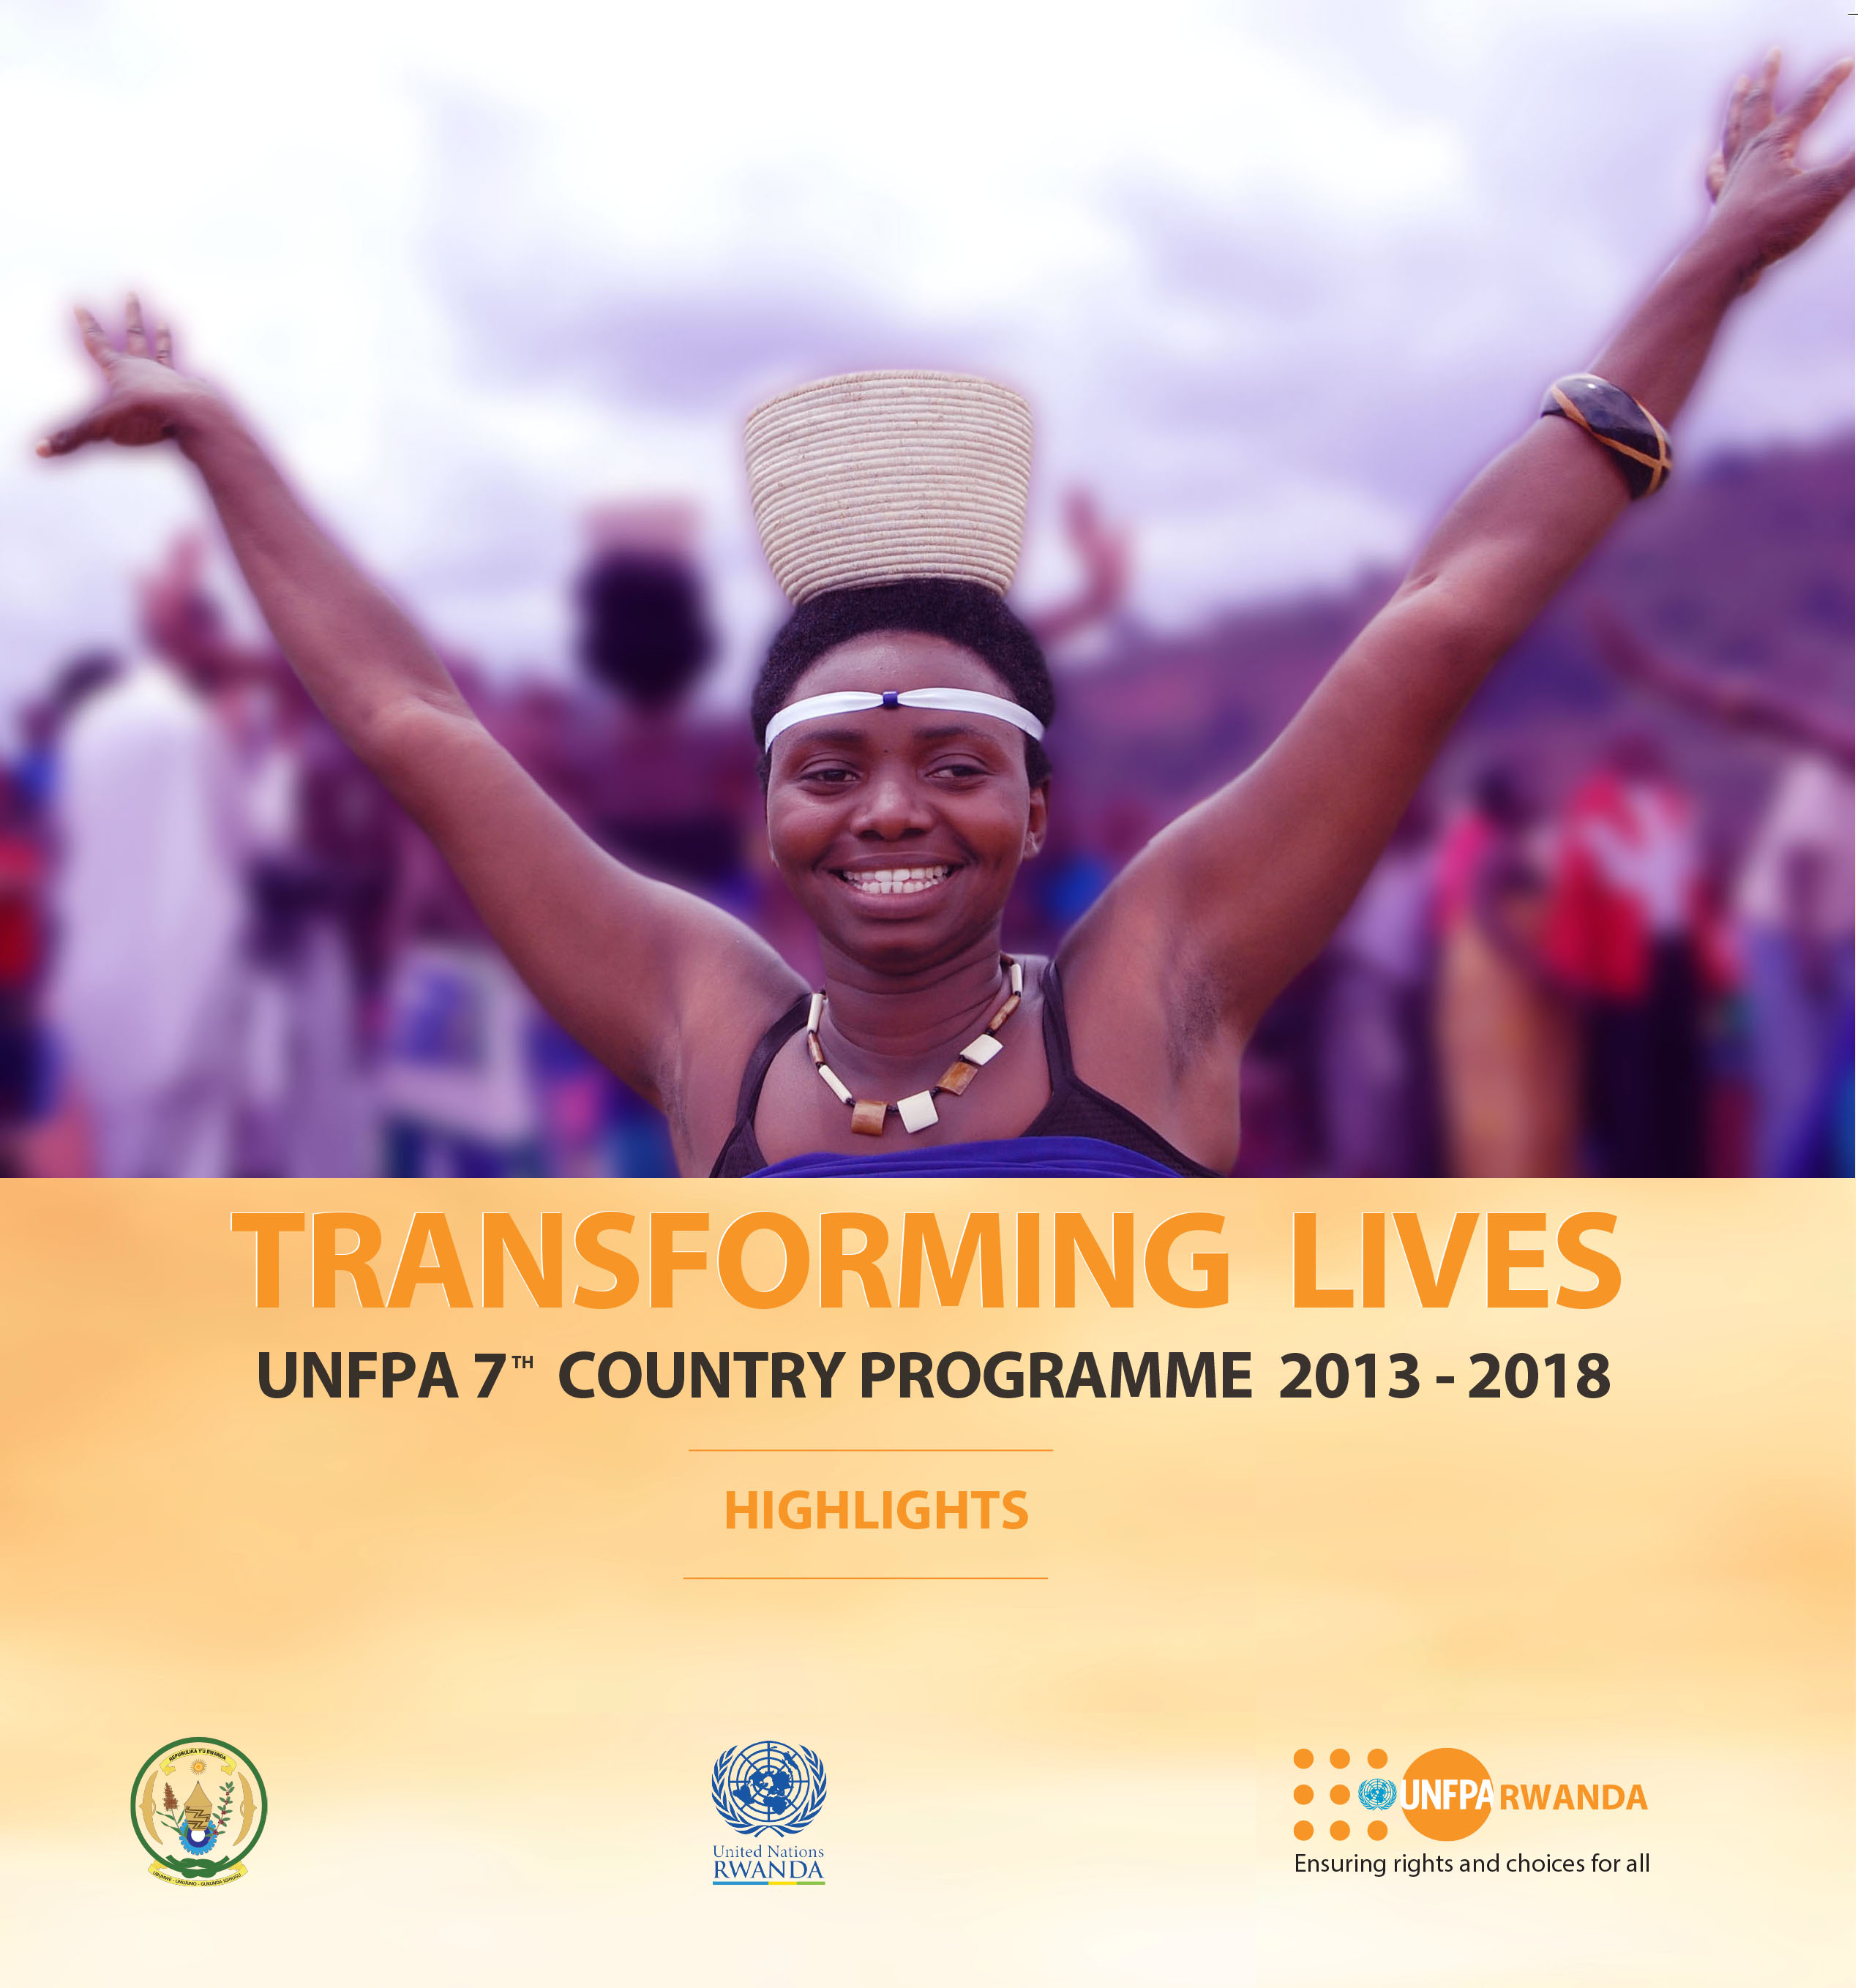 UNFPA 7th COUNTRY PROGRAMME 2013 - 2018